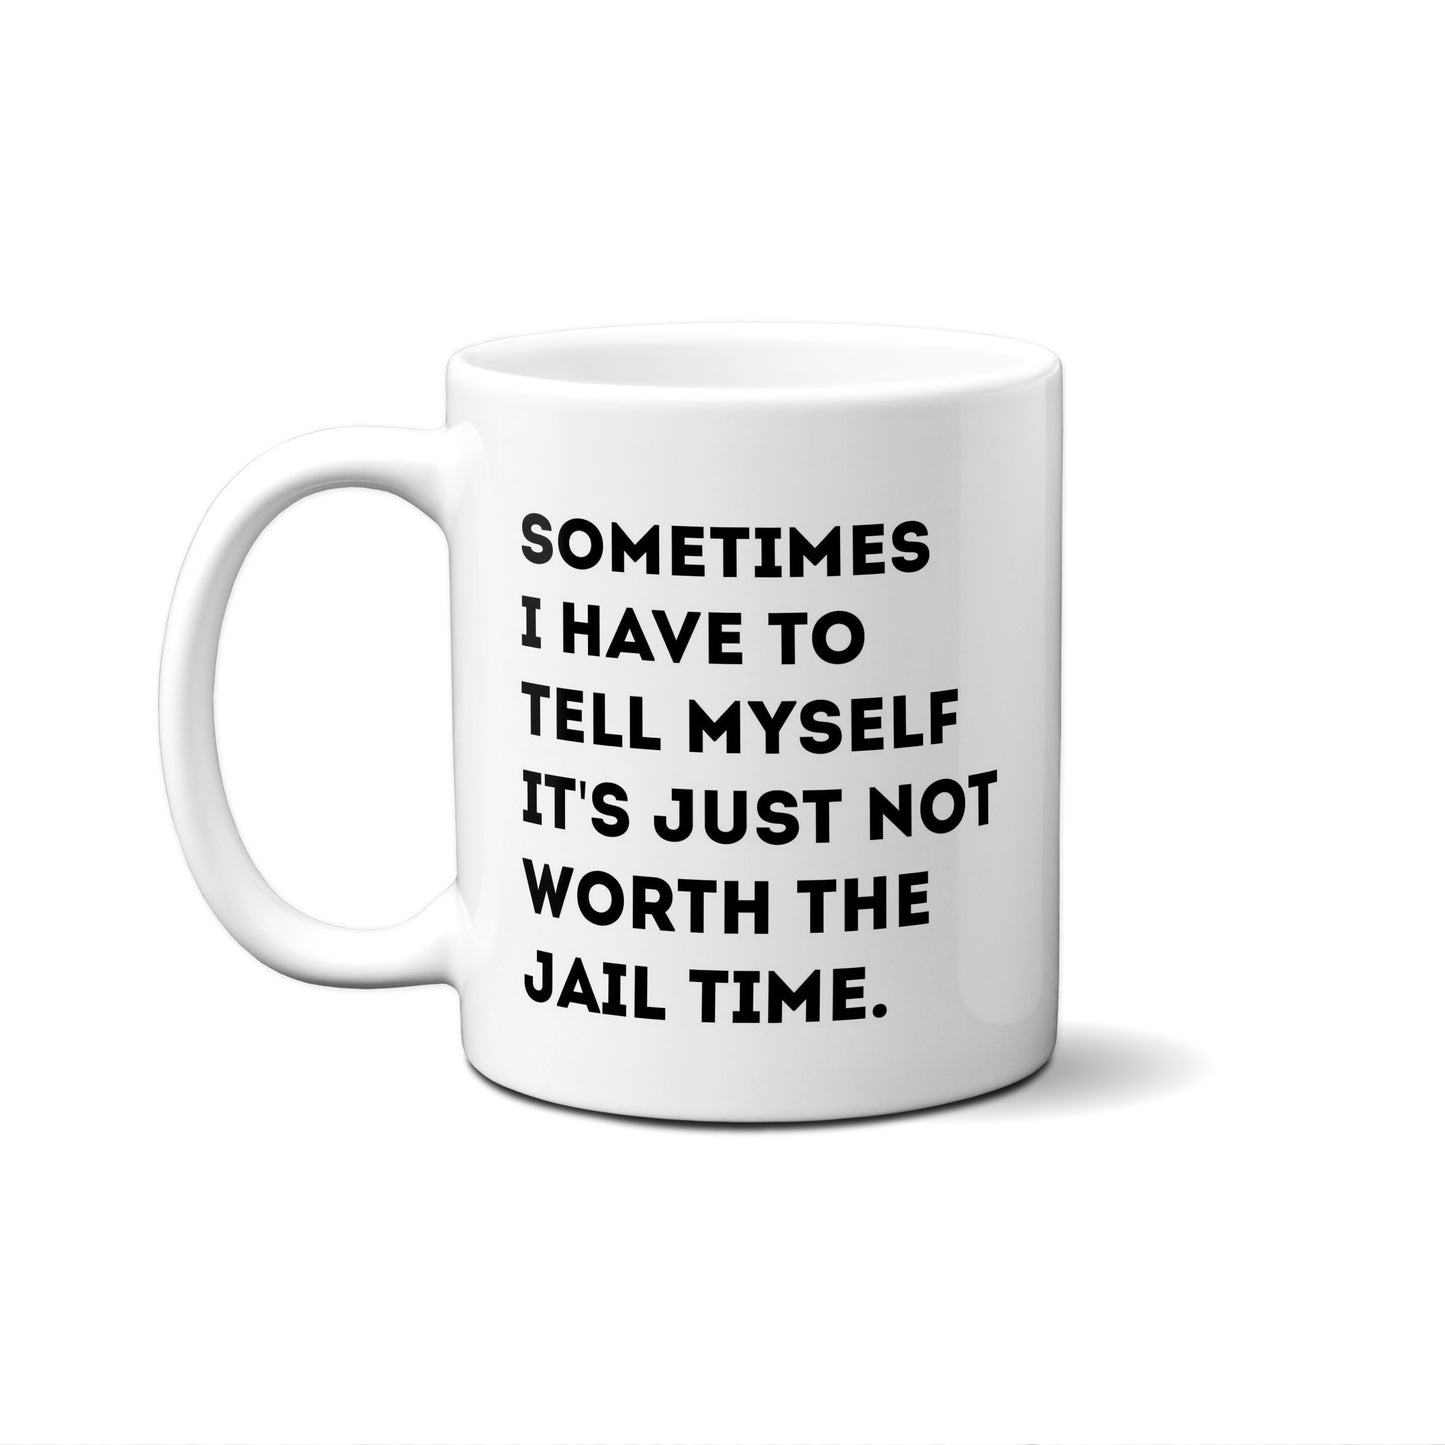 Sometimes I Have To Tell Myself It's Just Not Worth The Jail Time. Quote Mug